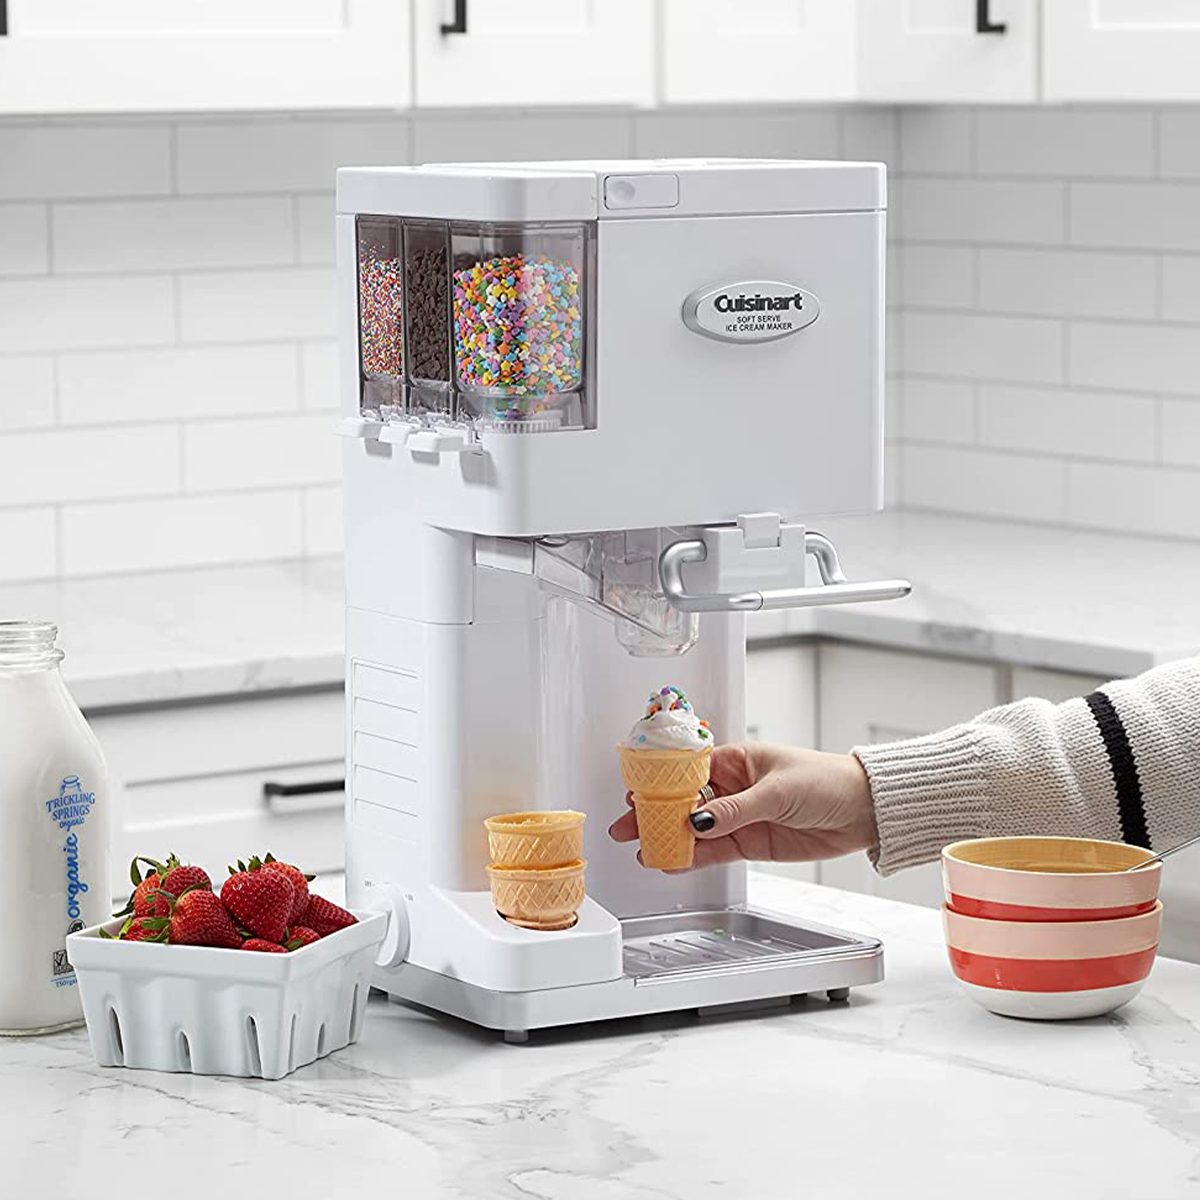 https://www.tasteofhome.com/wp-content/uploads/2023/06/The-Cuisinart-Ice-Cream-Maker-is-46-Off-in-Time-for-Summer_FT_via-amazon.com_.jpg?fit=700%2C1024